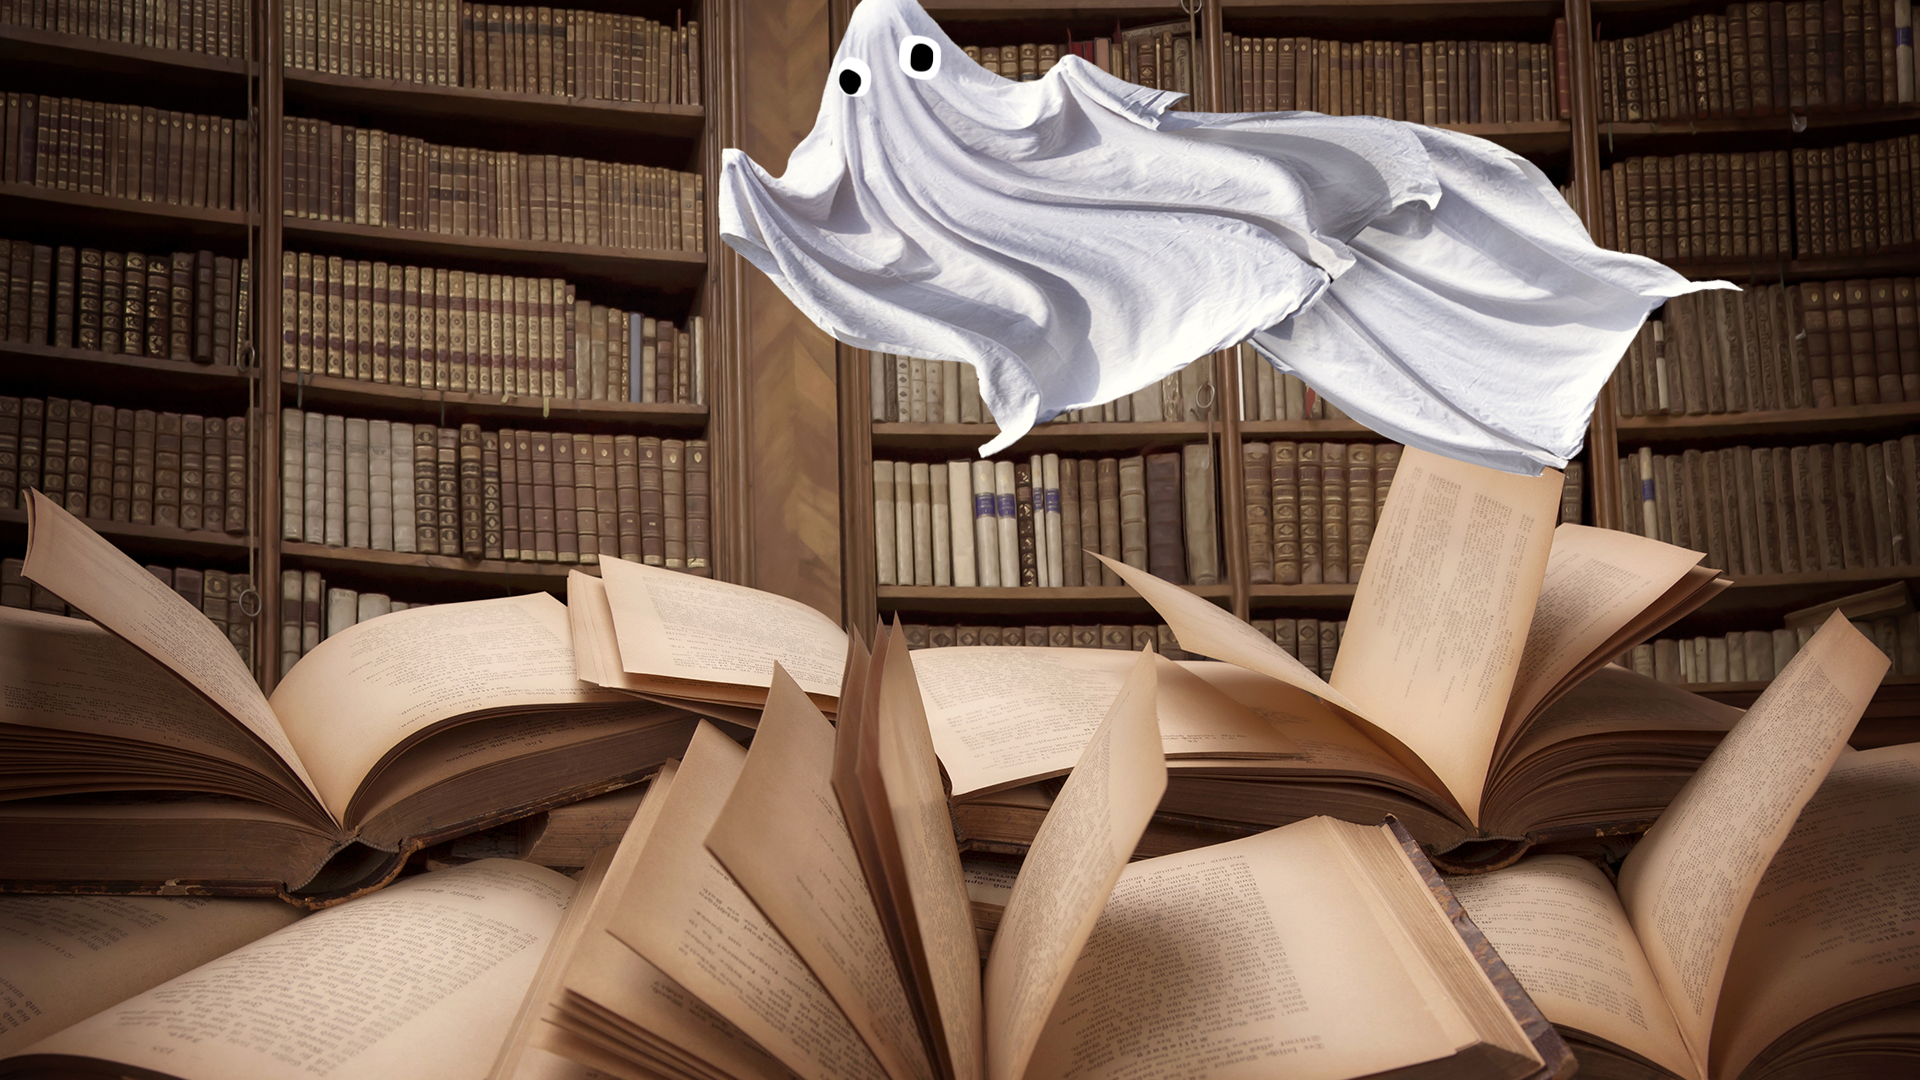 A Beano ghost in a room of dusty books